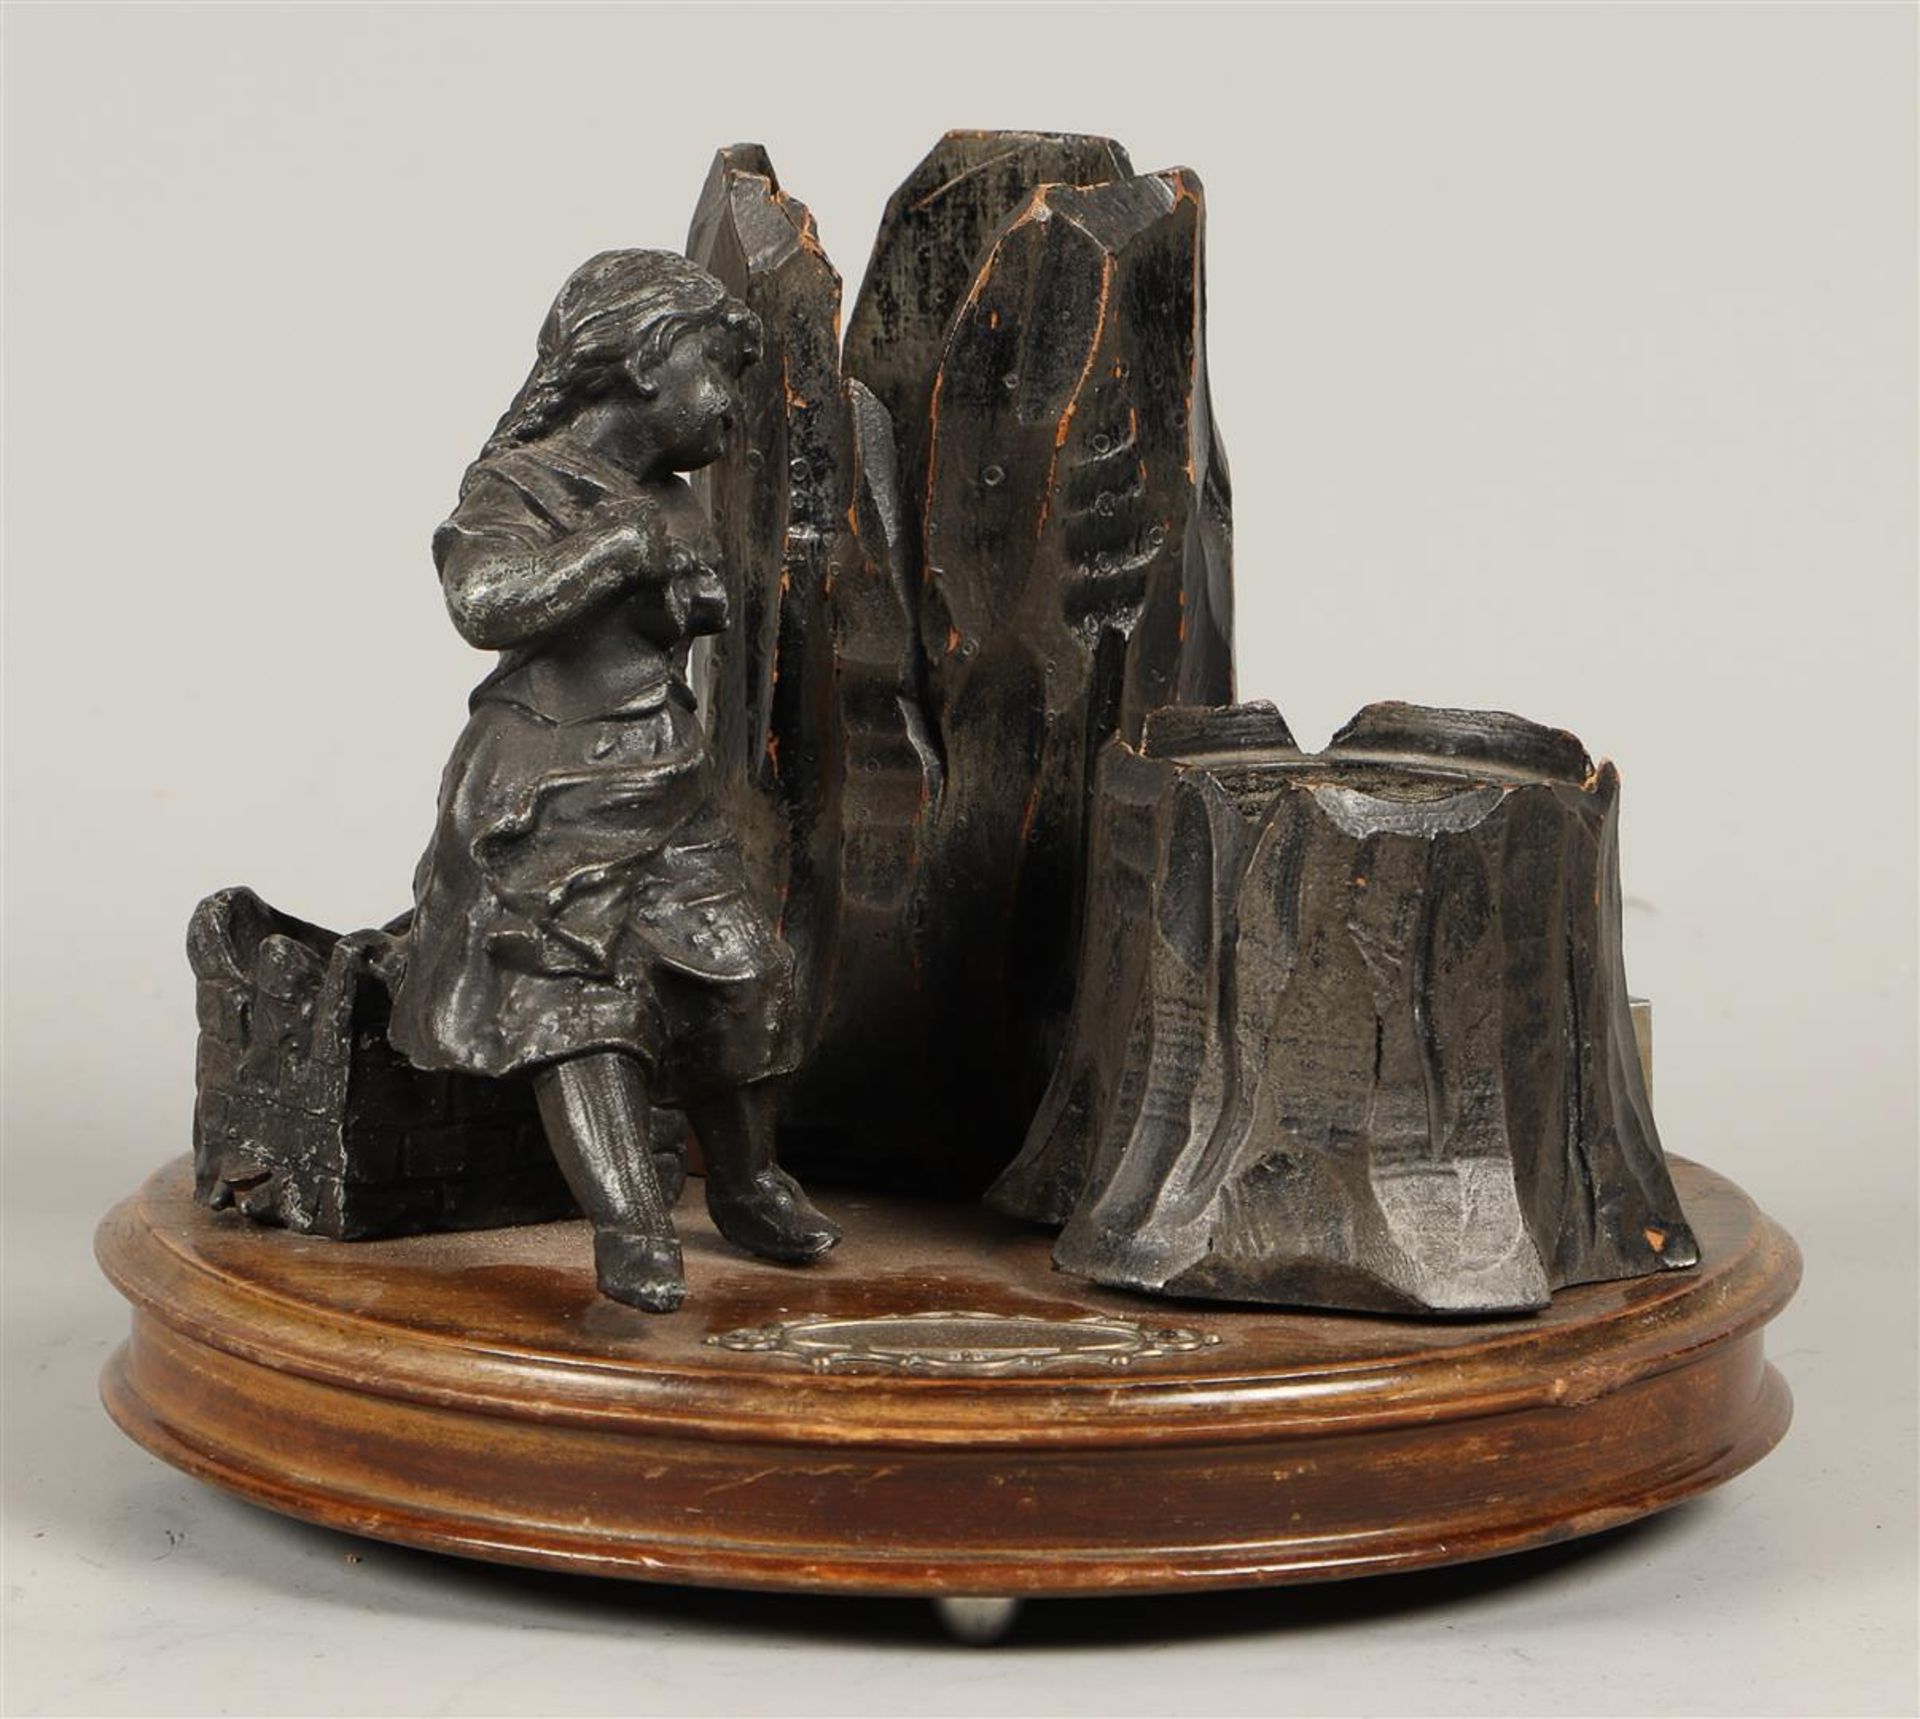 A part wooden smoking desk set depicting a little girl by a tree trunk,  ca. 1900.